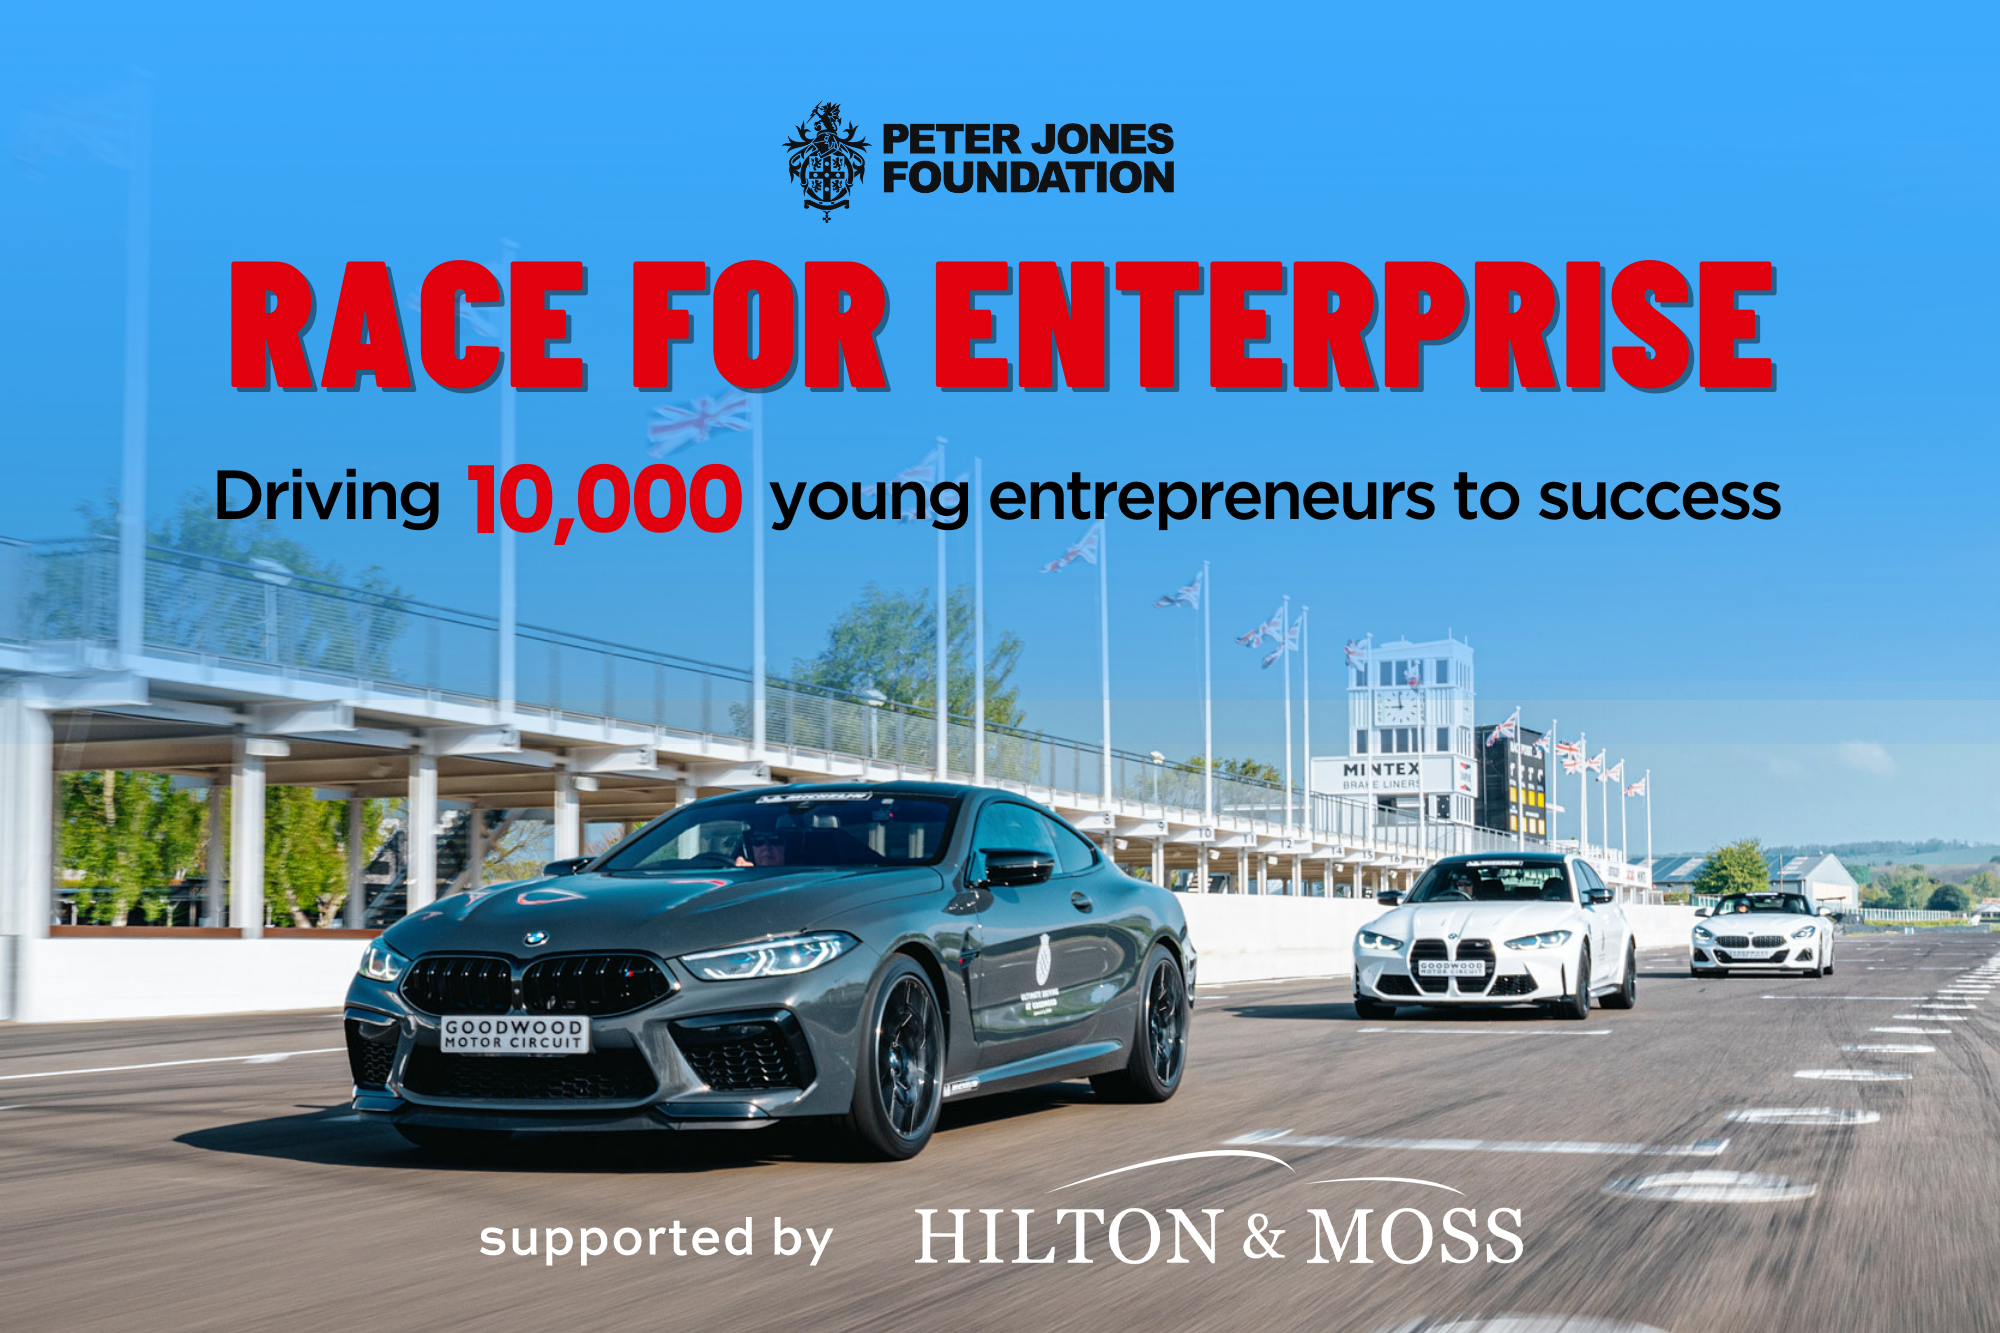 Race for Enterprise with the Peter Jones Foundation